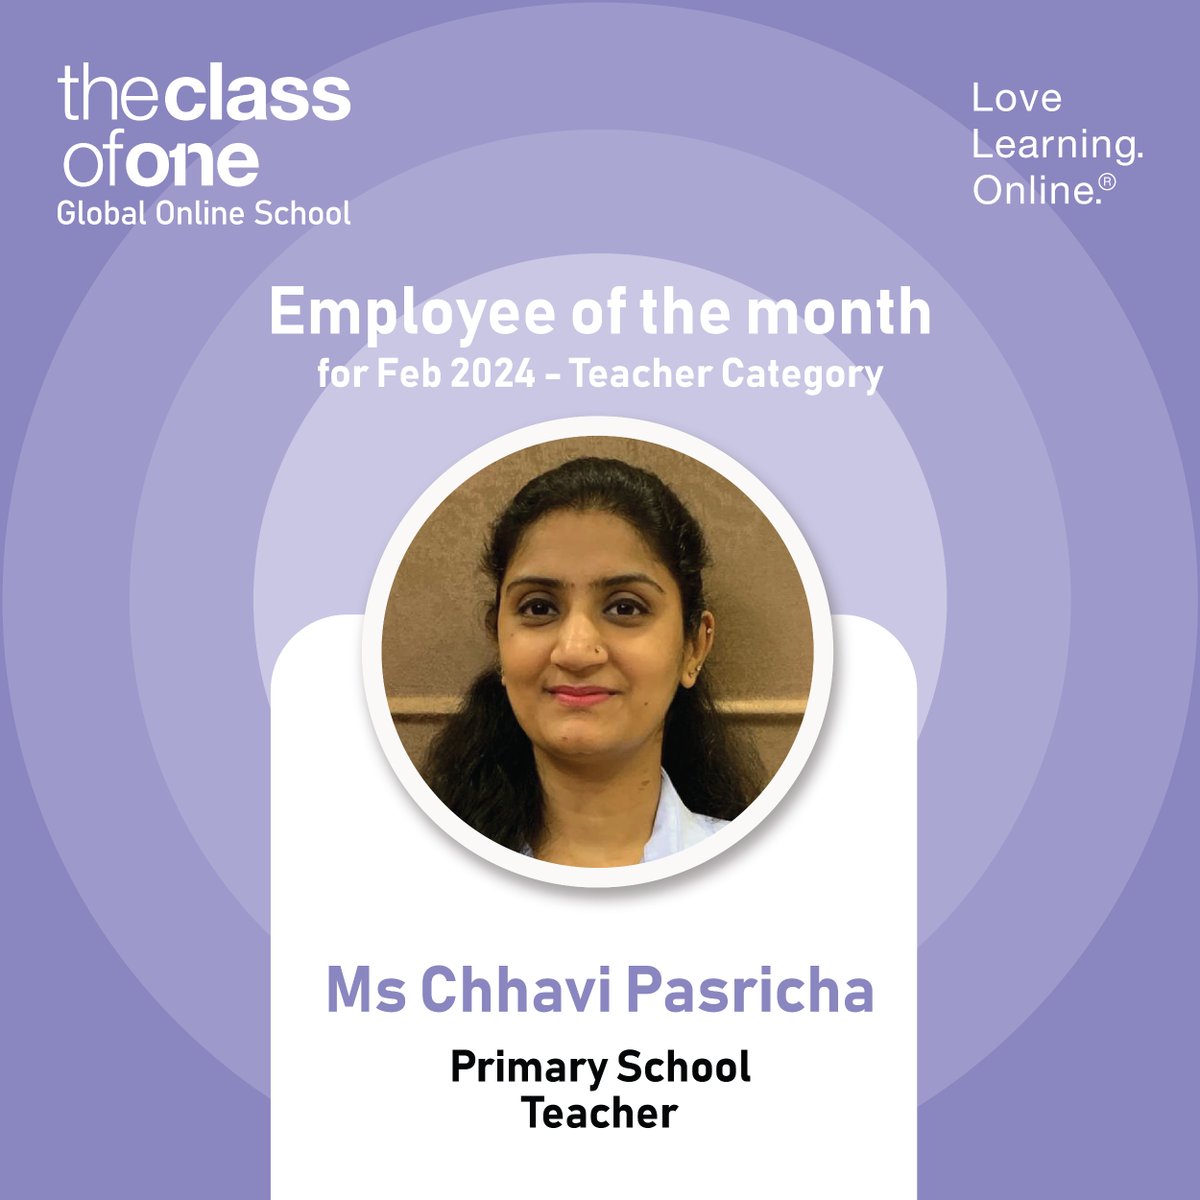 Celebrating Ms. Chhavi Pasricha for her exceptional dedication and nurturing approach in Primary School. She not only imparts knowledge but also instils a passion for learning, shaping young minds for a brighter future.

#EmployeeOfTheMonth #OnlineSchool #Eschool #FunLearning